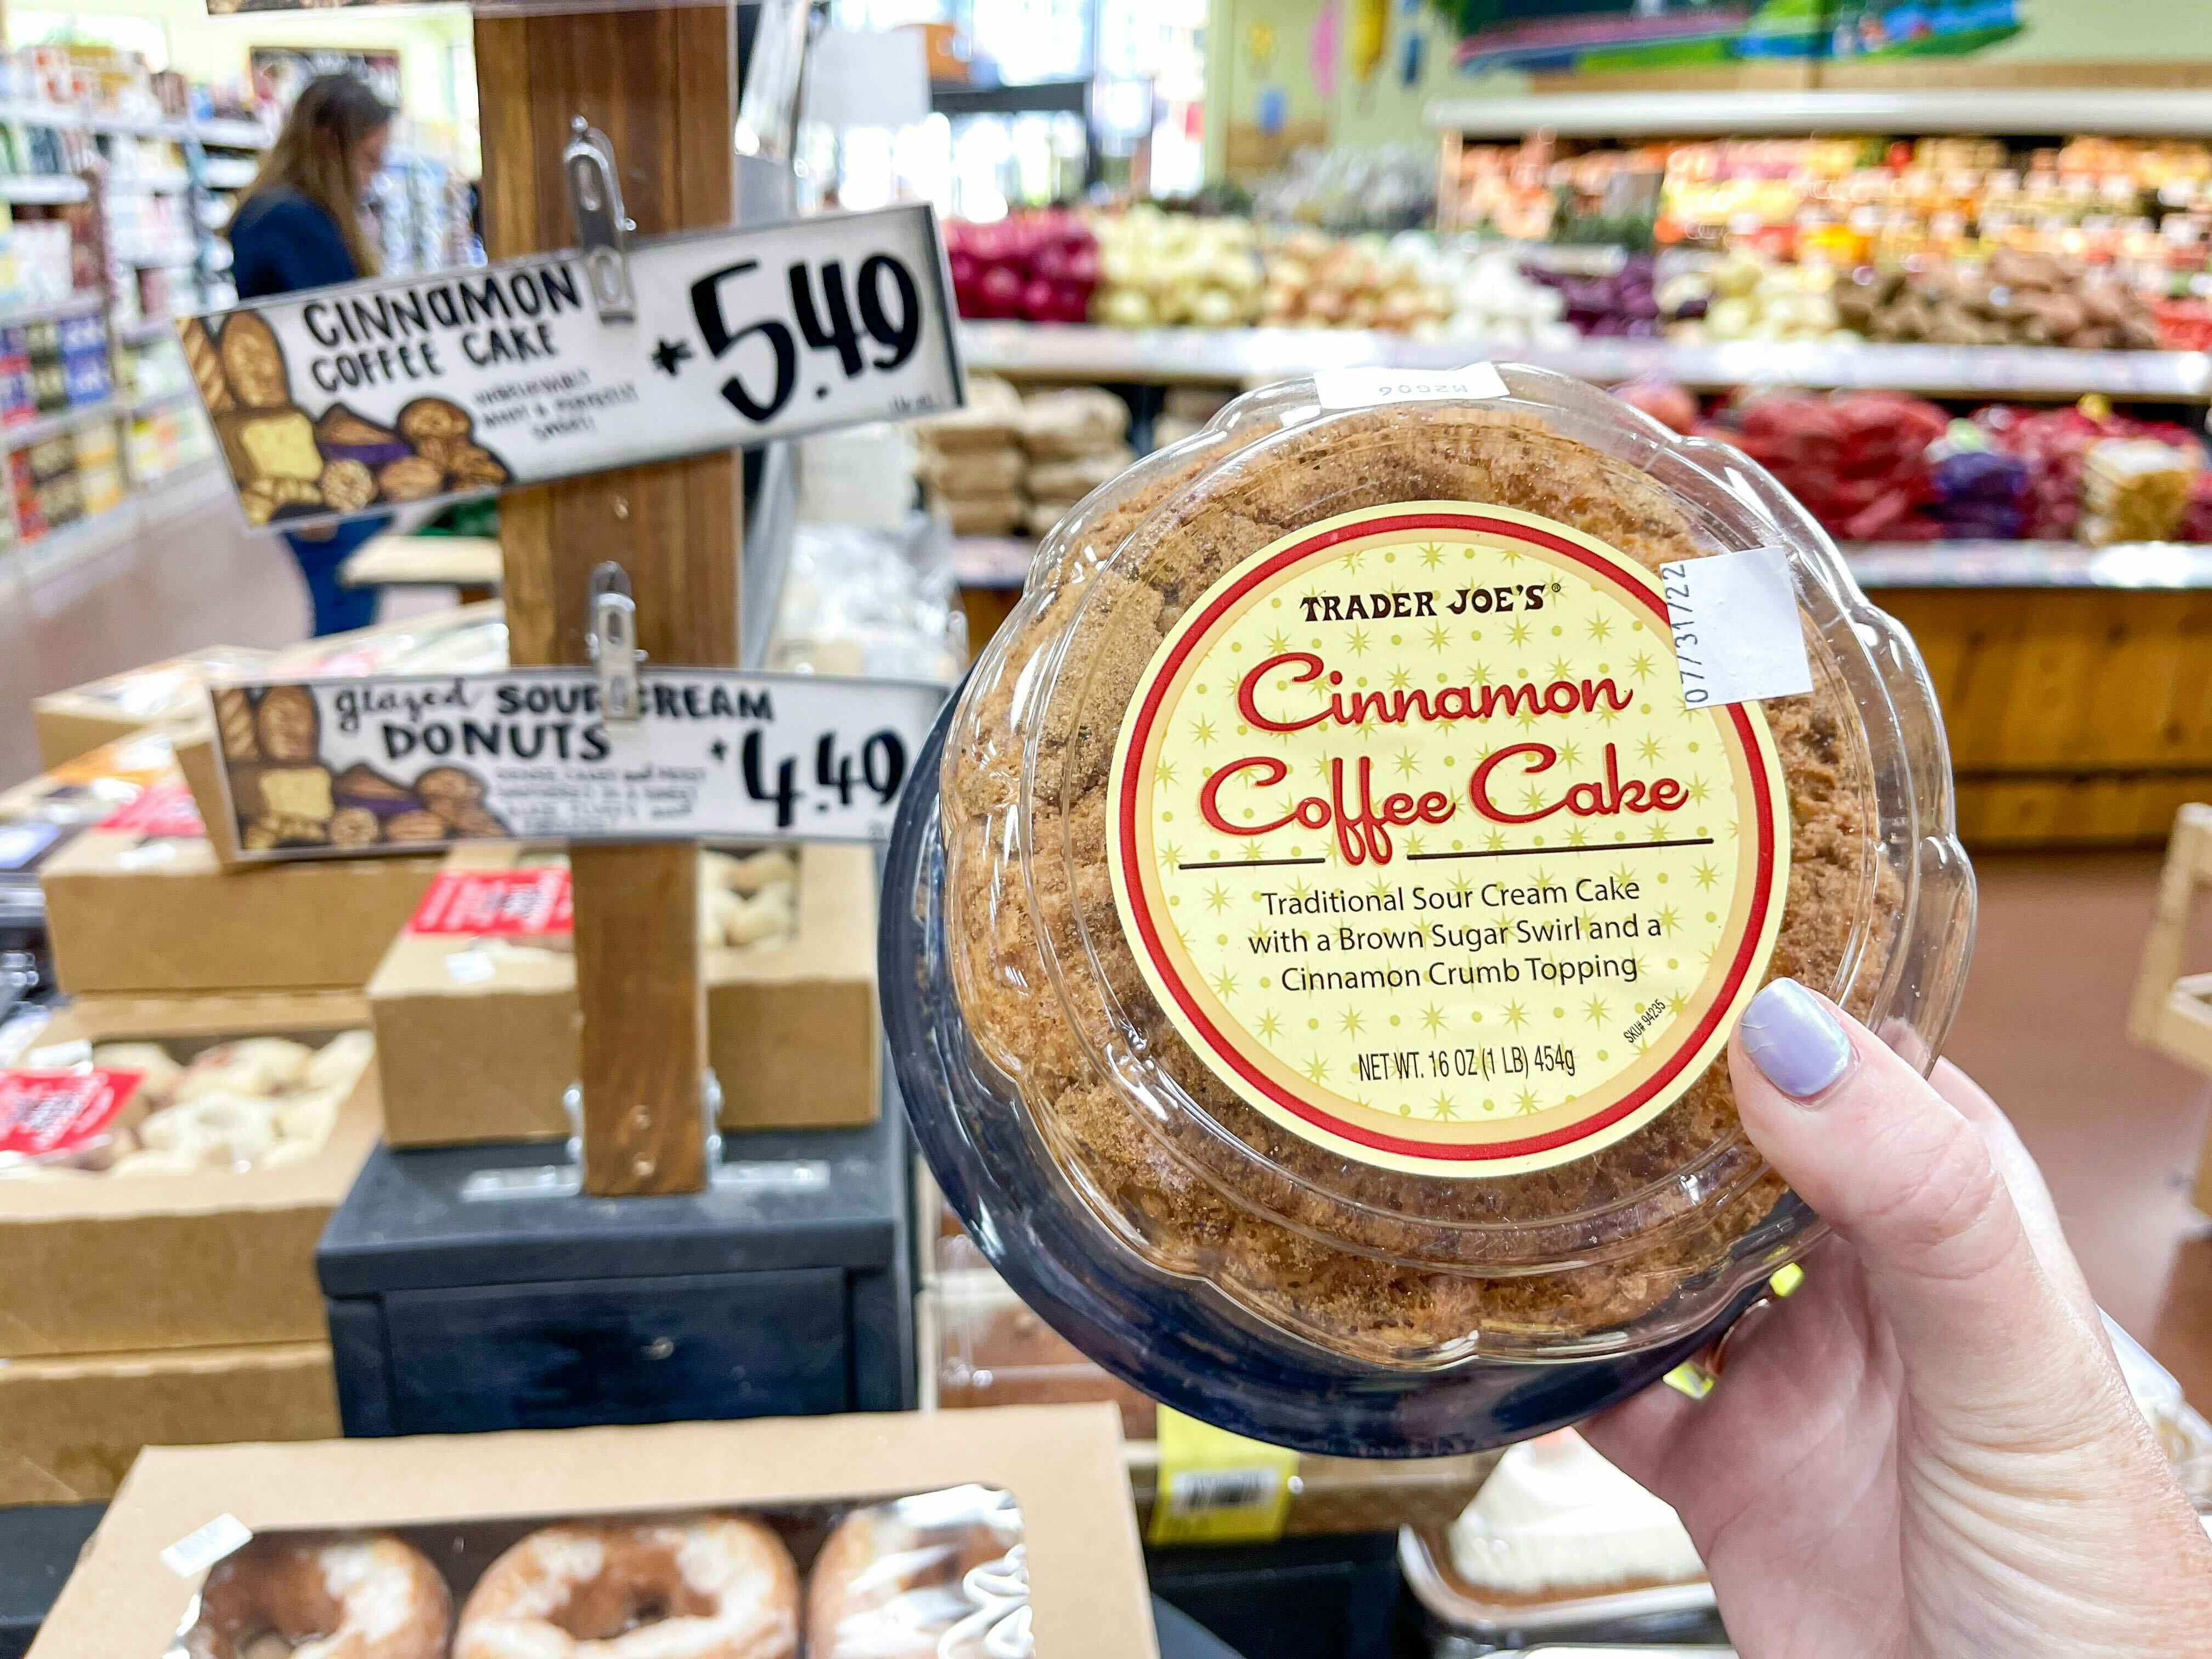 A person's hand holding a Trader Joe's Cinnamon Coffee Cake in front of a table in the bakery at Trader Joe's.